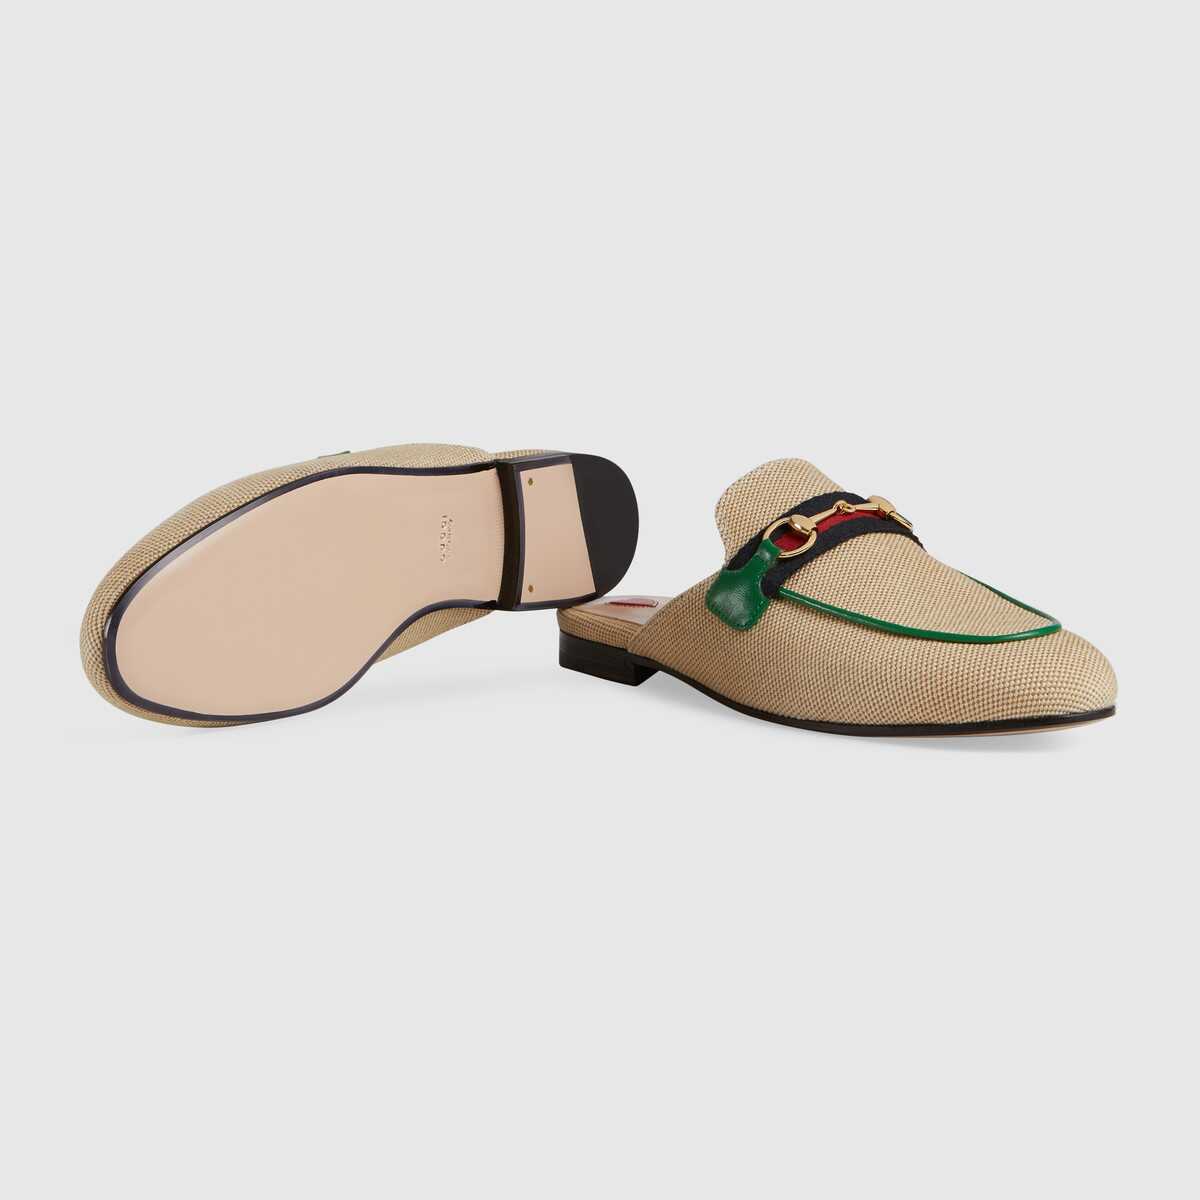 Gucci Online Exclusive womens Princetown canvas slipper GG1520BL-1